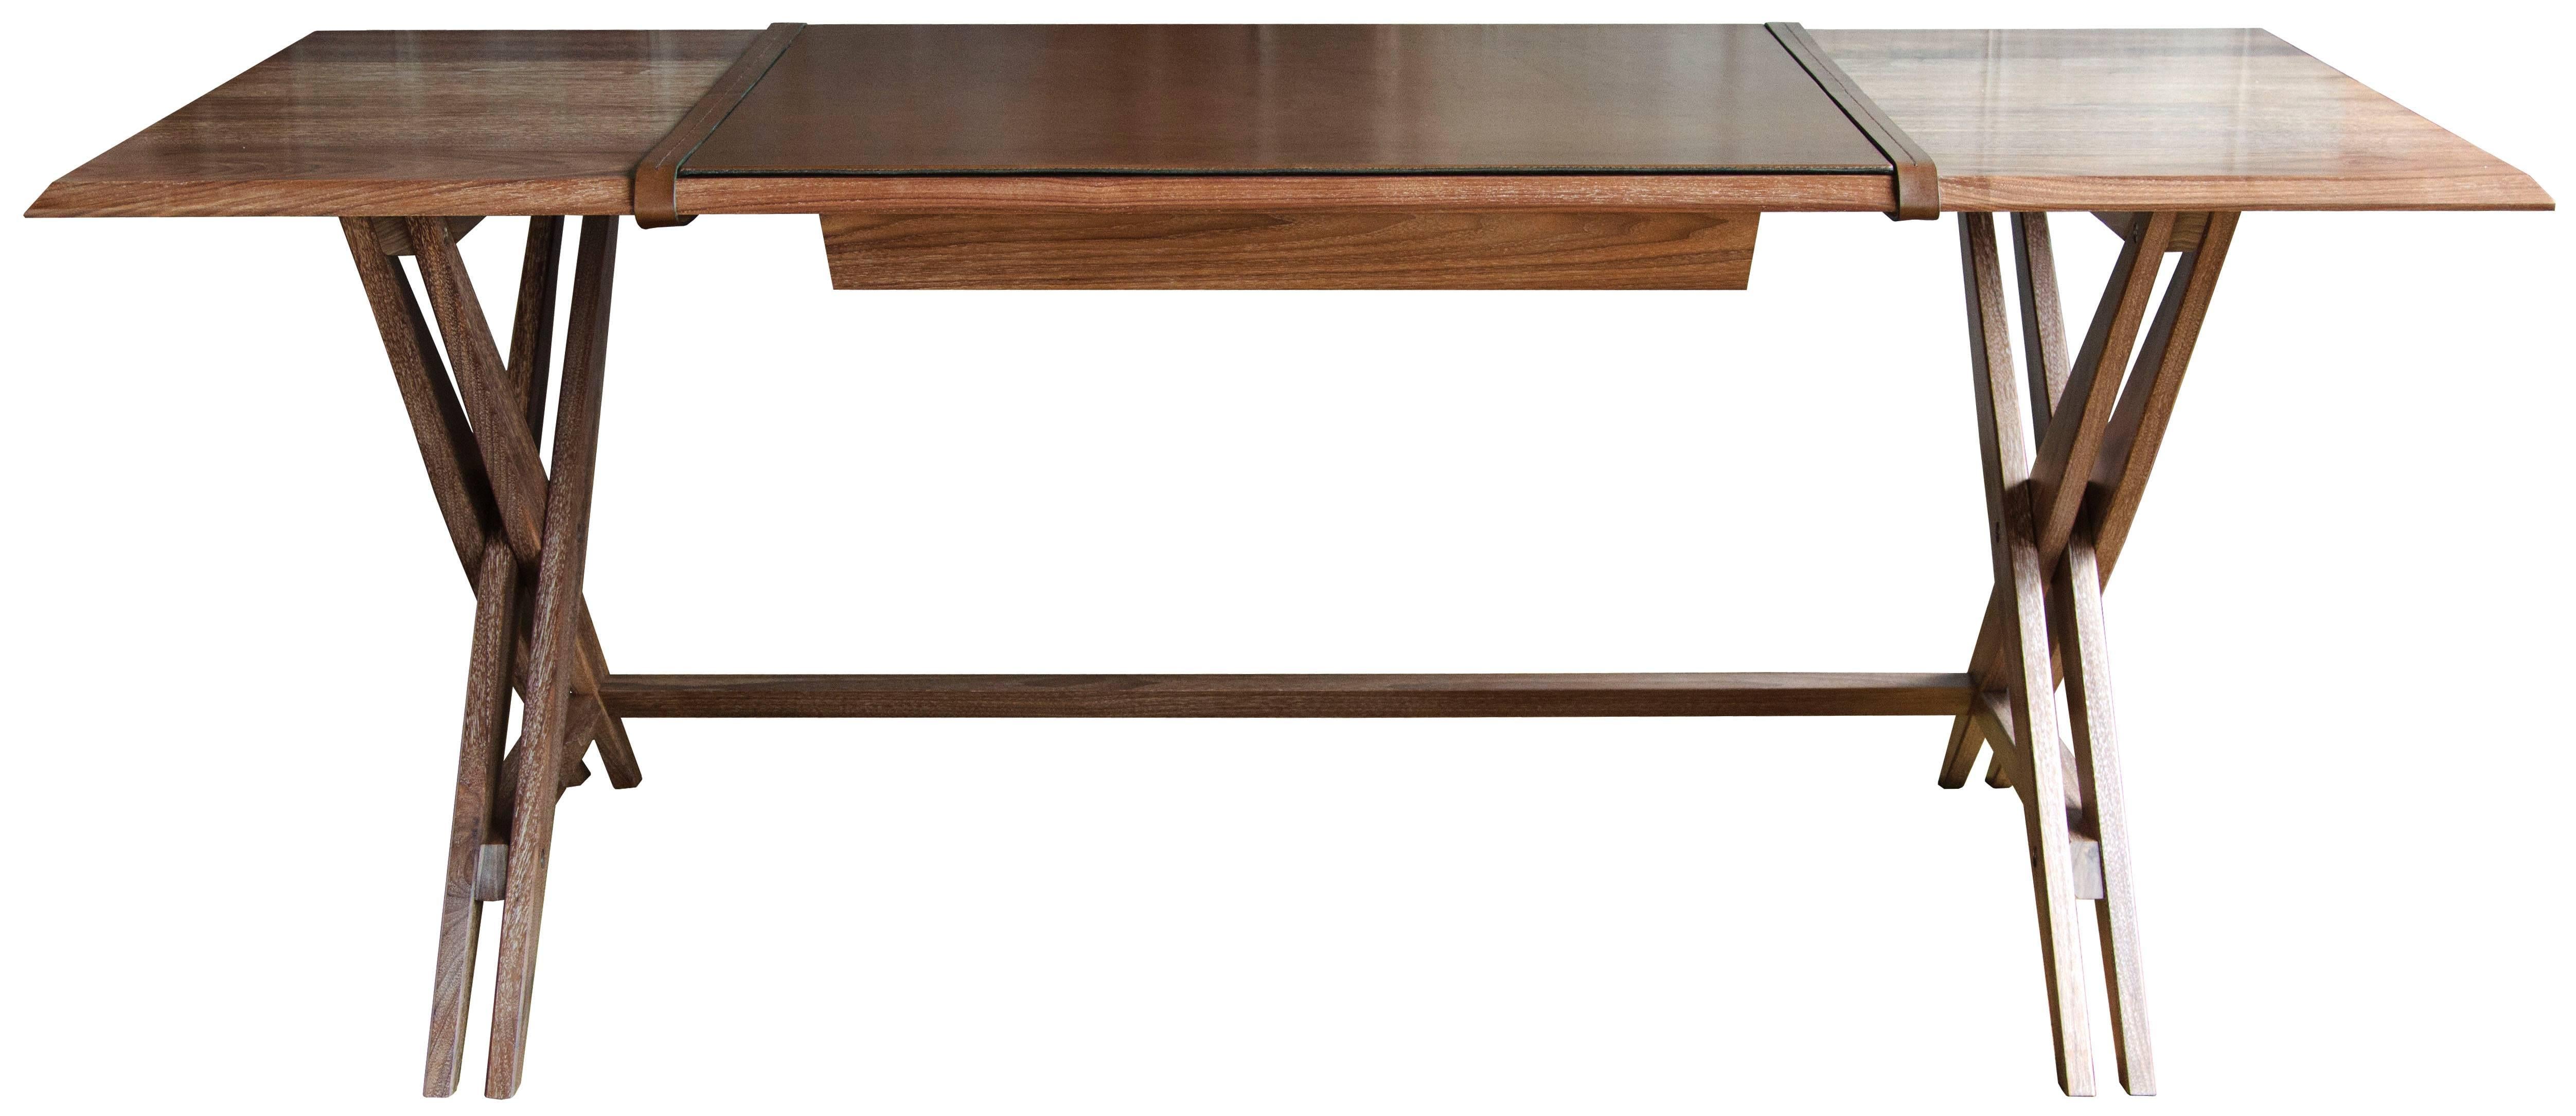 The Octavio desk Type 1 (single drawer) in limed and oiled walnut with Moore & Giles: Diablo / Woodland leather blotter with straps and drawer lining.

The modern campaign collection by Richard Wrightman combines the vernacular of traditional form